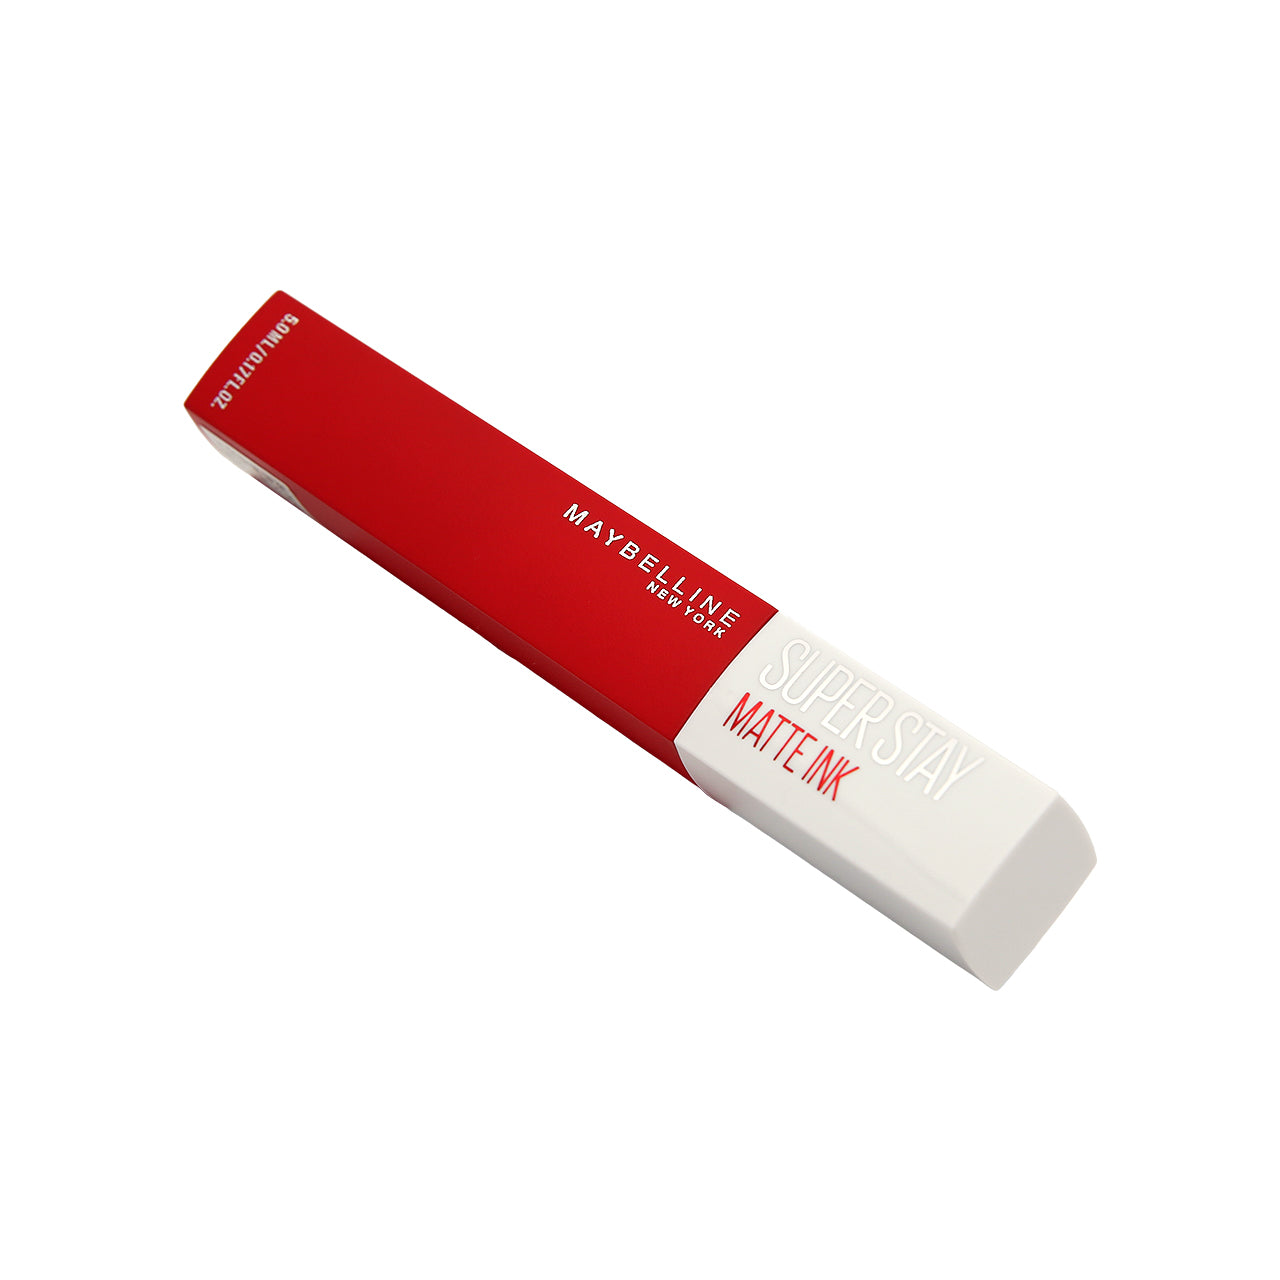 Maybelline Superstay Matte Ink #220 Ambitious 5ml | Sasa Global eShop